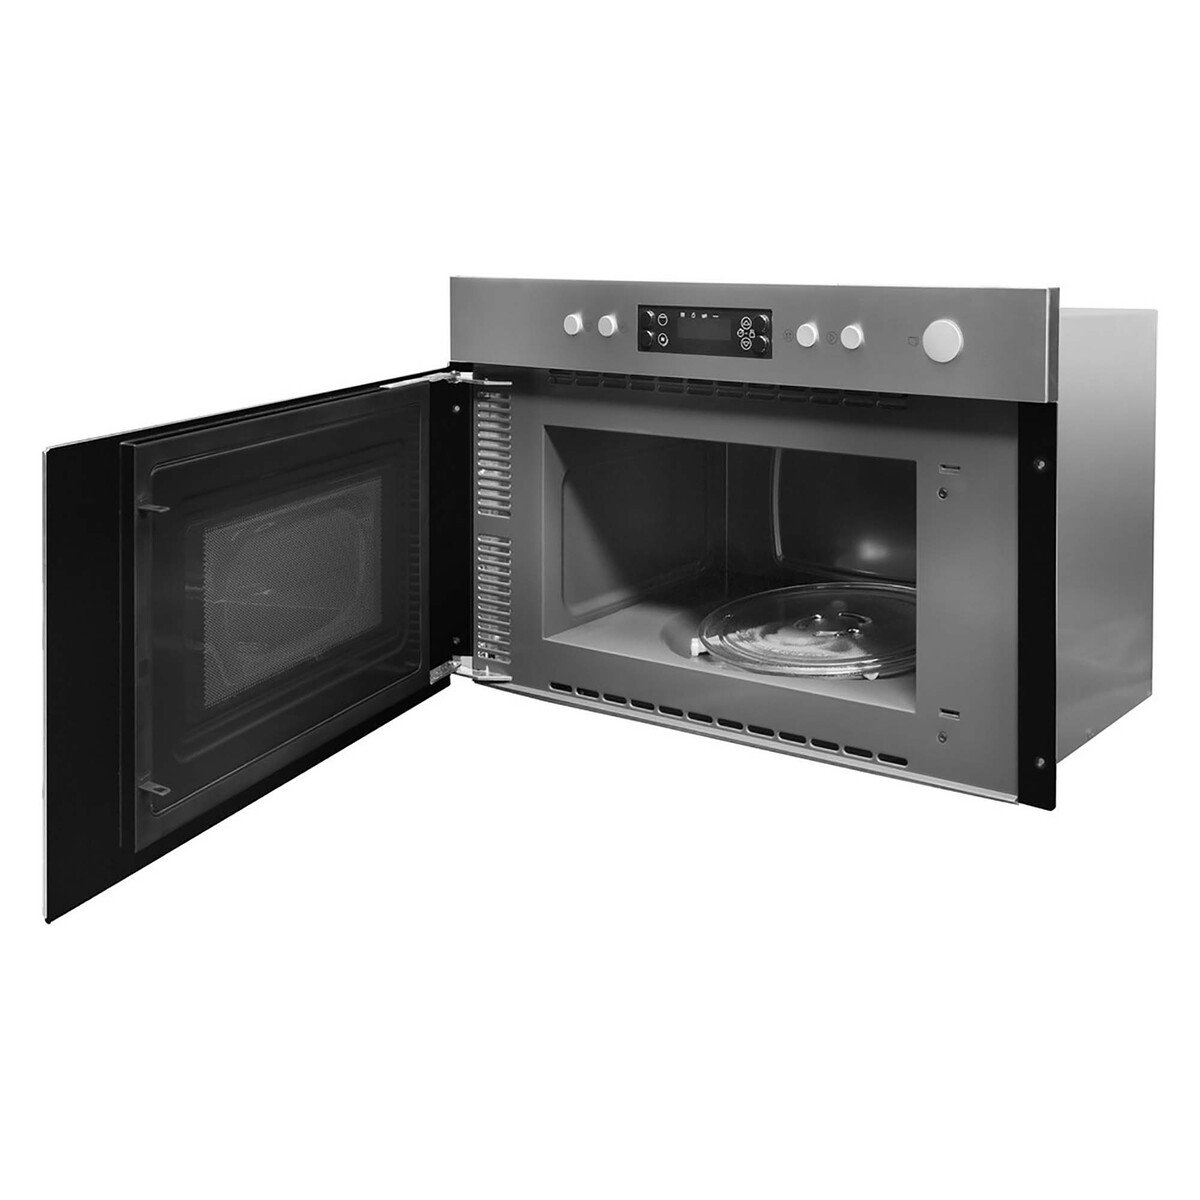 Indesit Microwave With Grill MWi5213iXUK 22LTR